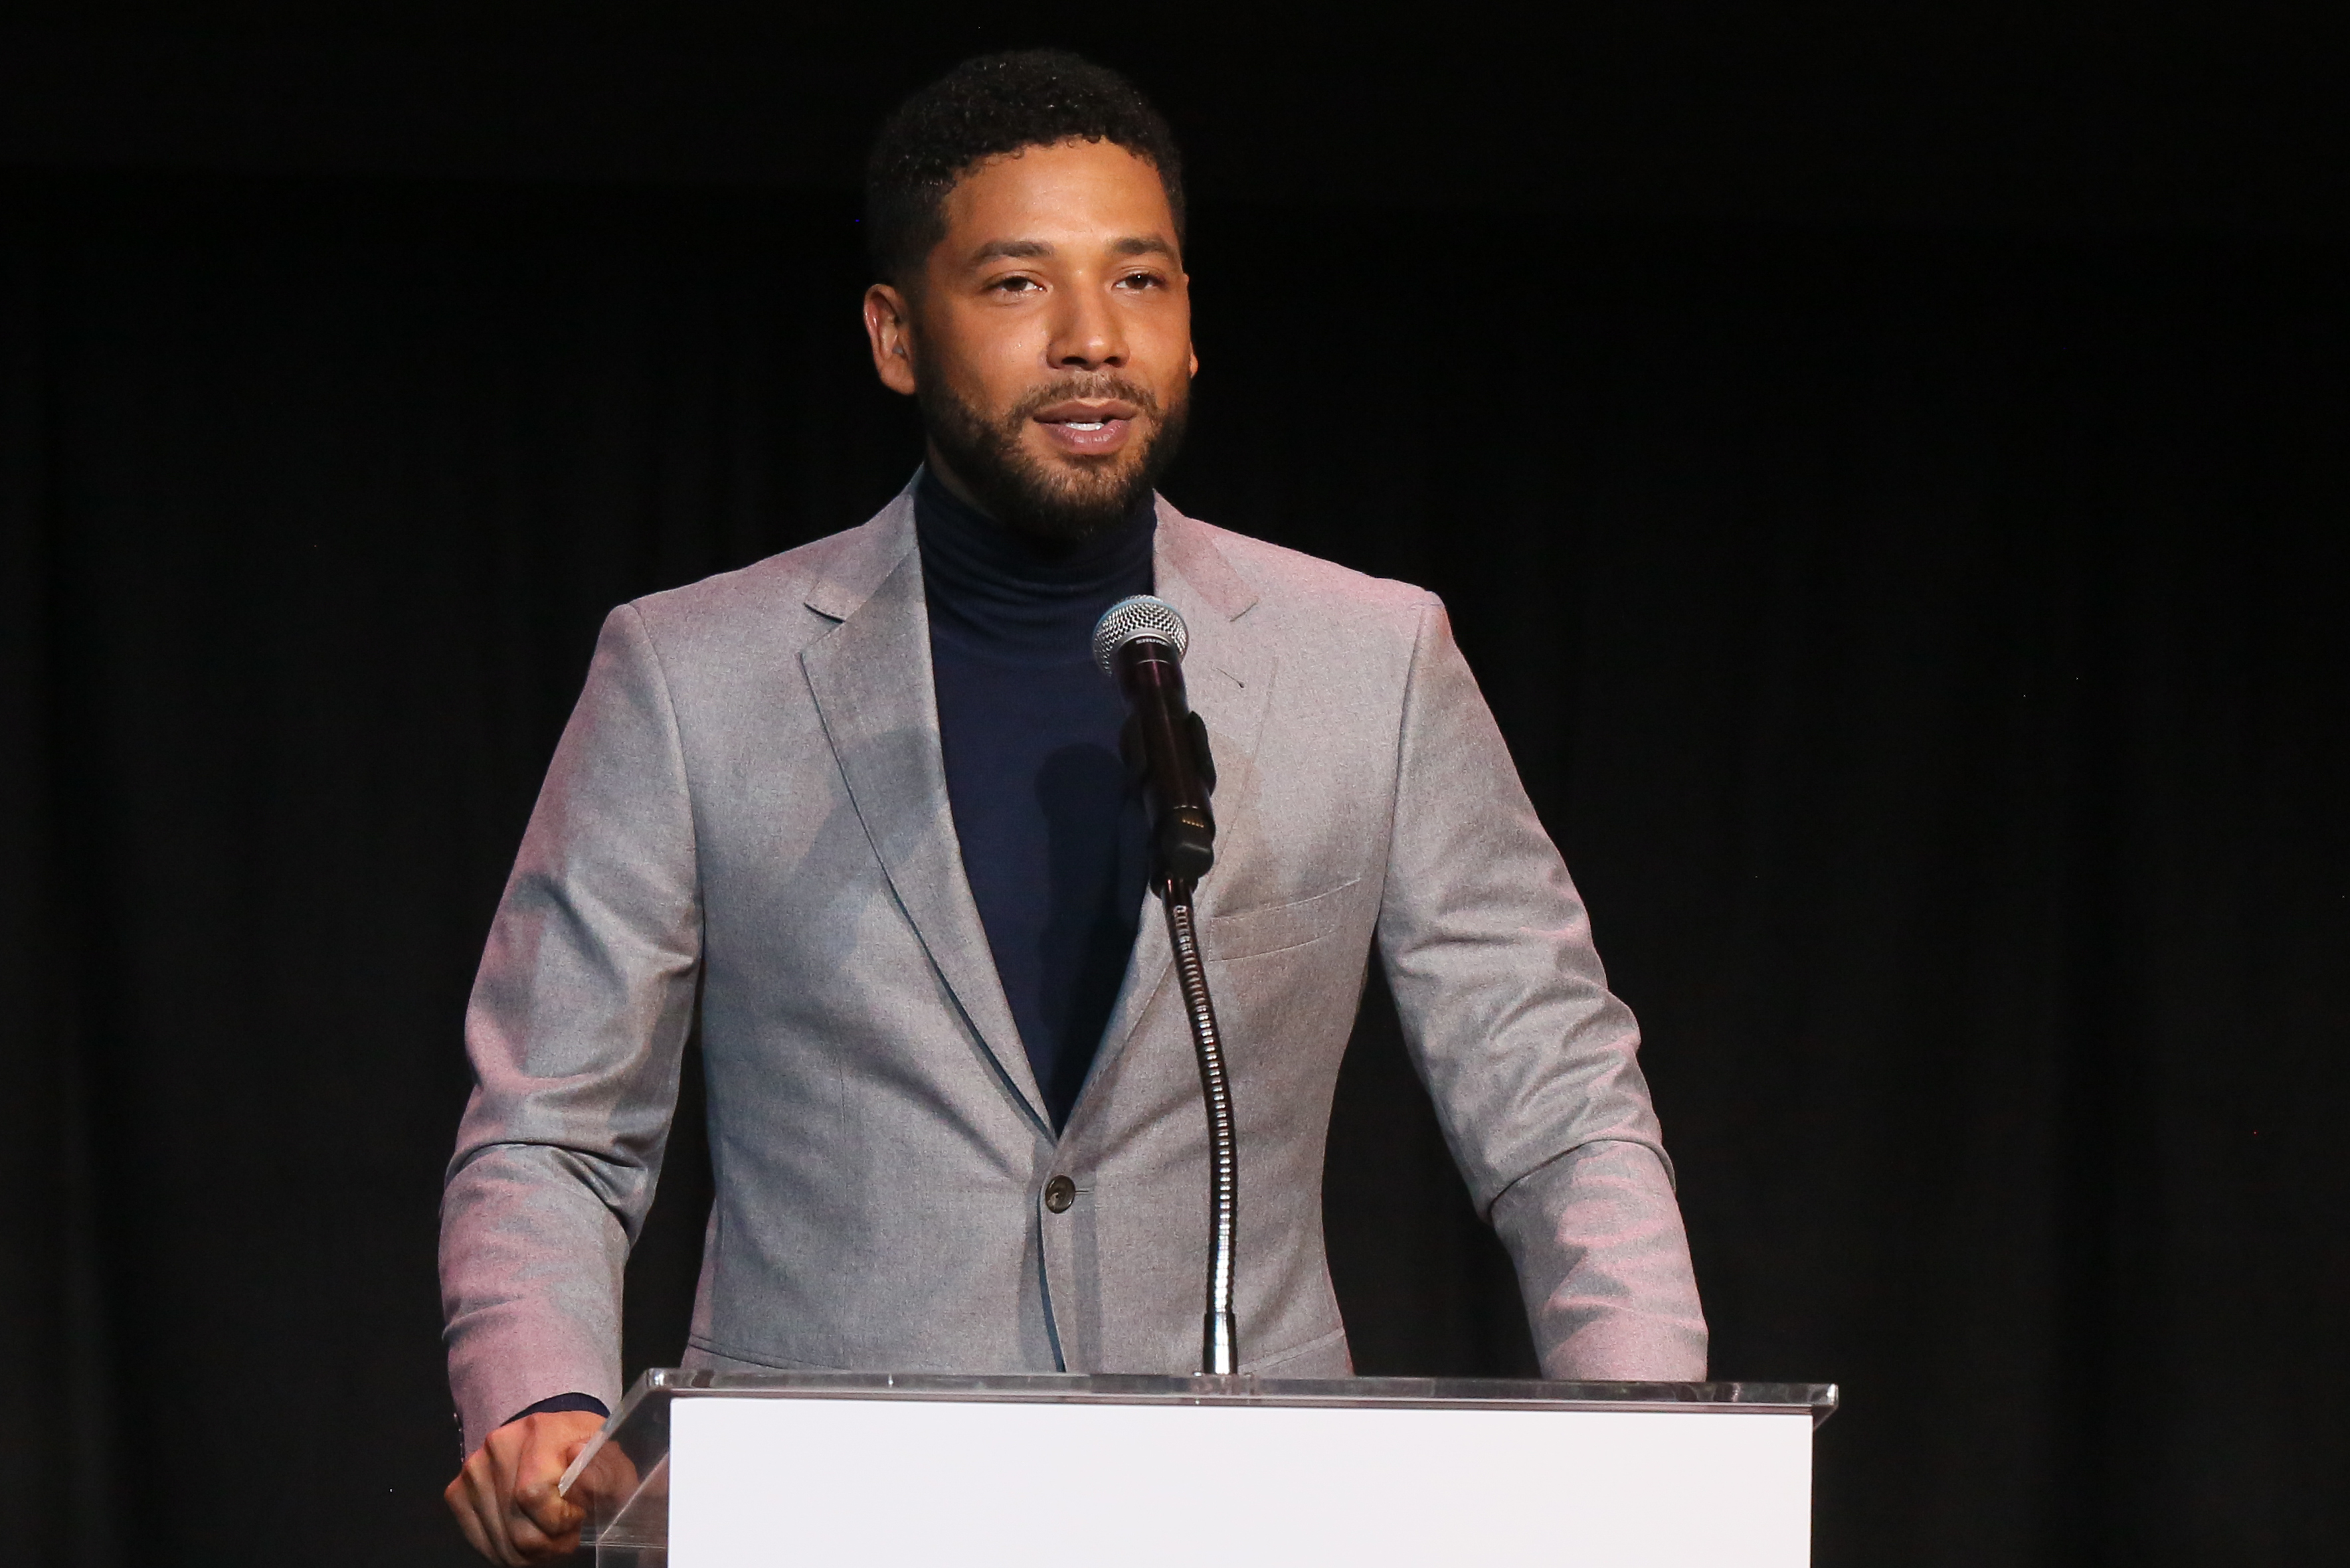 Jussie Smollett speaks at the Children's Defense Fund California's 28th Annual Beat The Odds Awards at Skirball Cultural Center in Los Angeles on Dec. 6, 2018. (Gabriel Olsen&mdash;Getty Images)